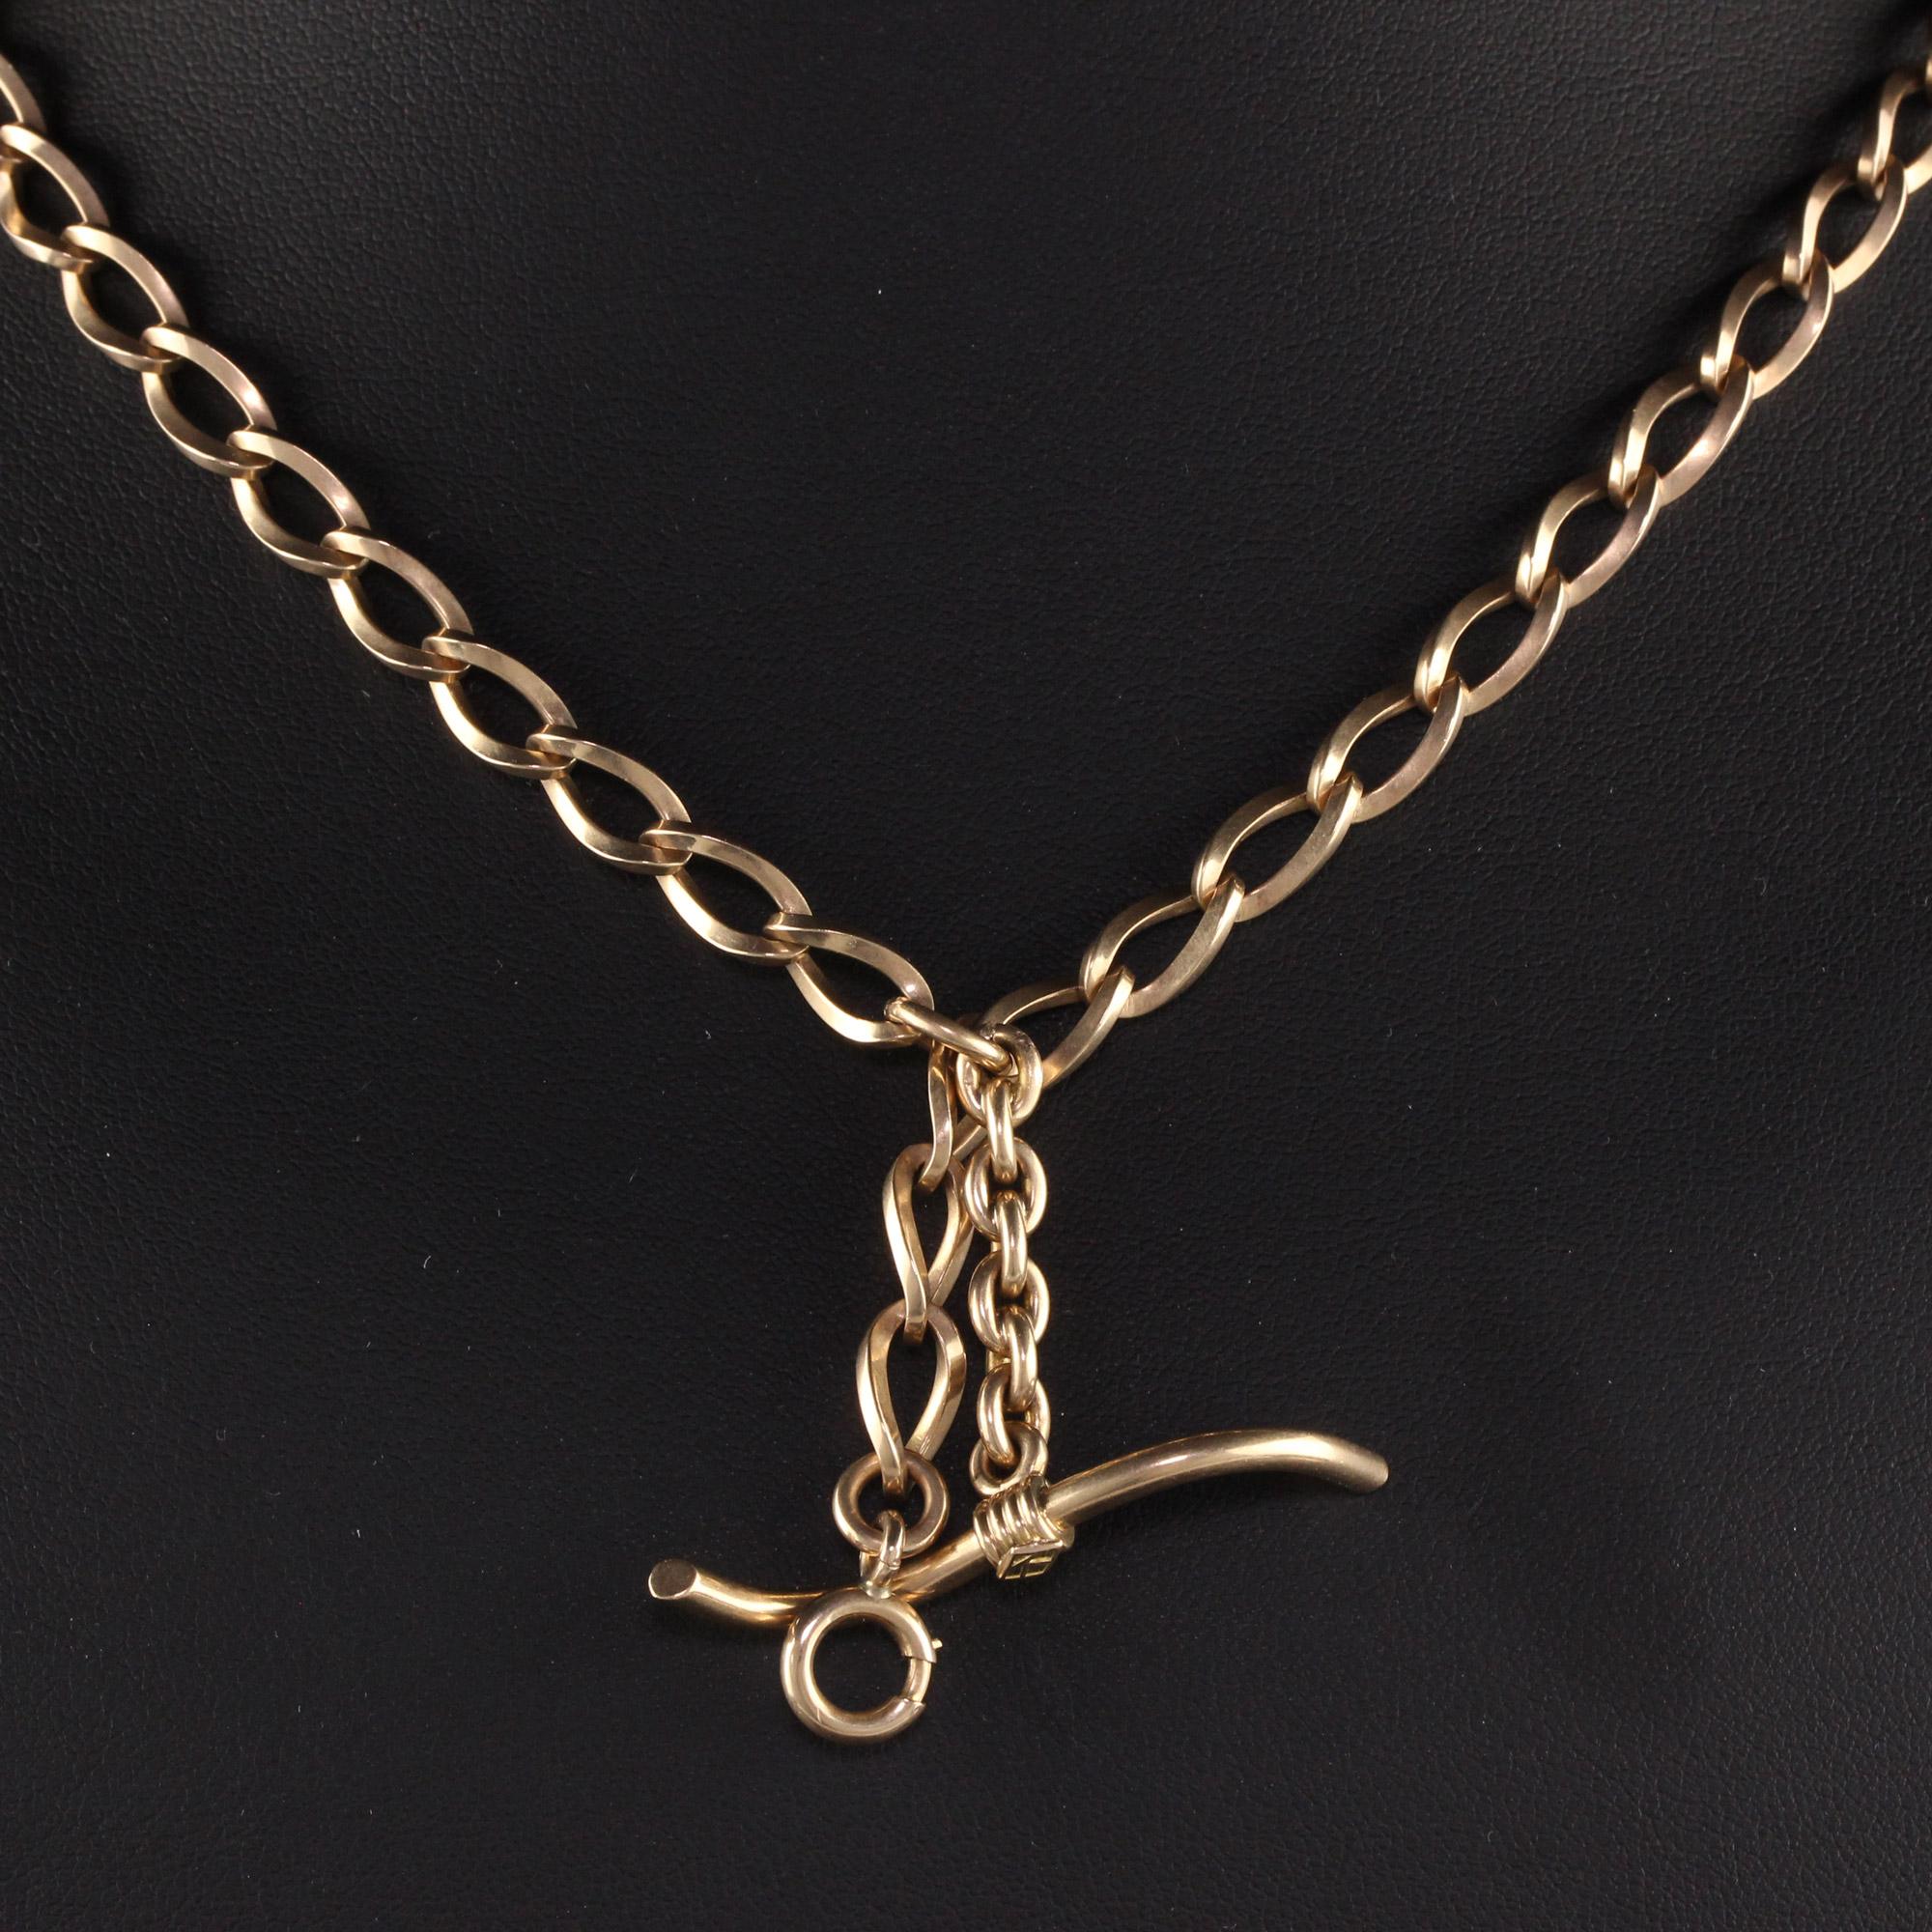 Antique Victorian 14K Yellow Gold Link Chain Watch Fob Necklace 2